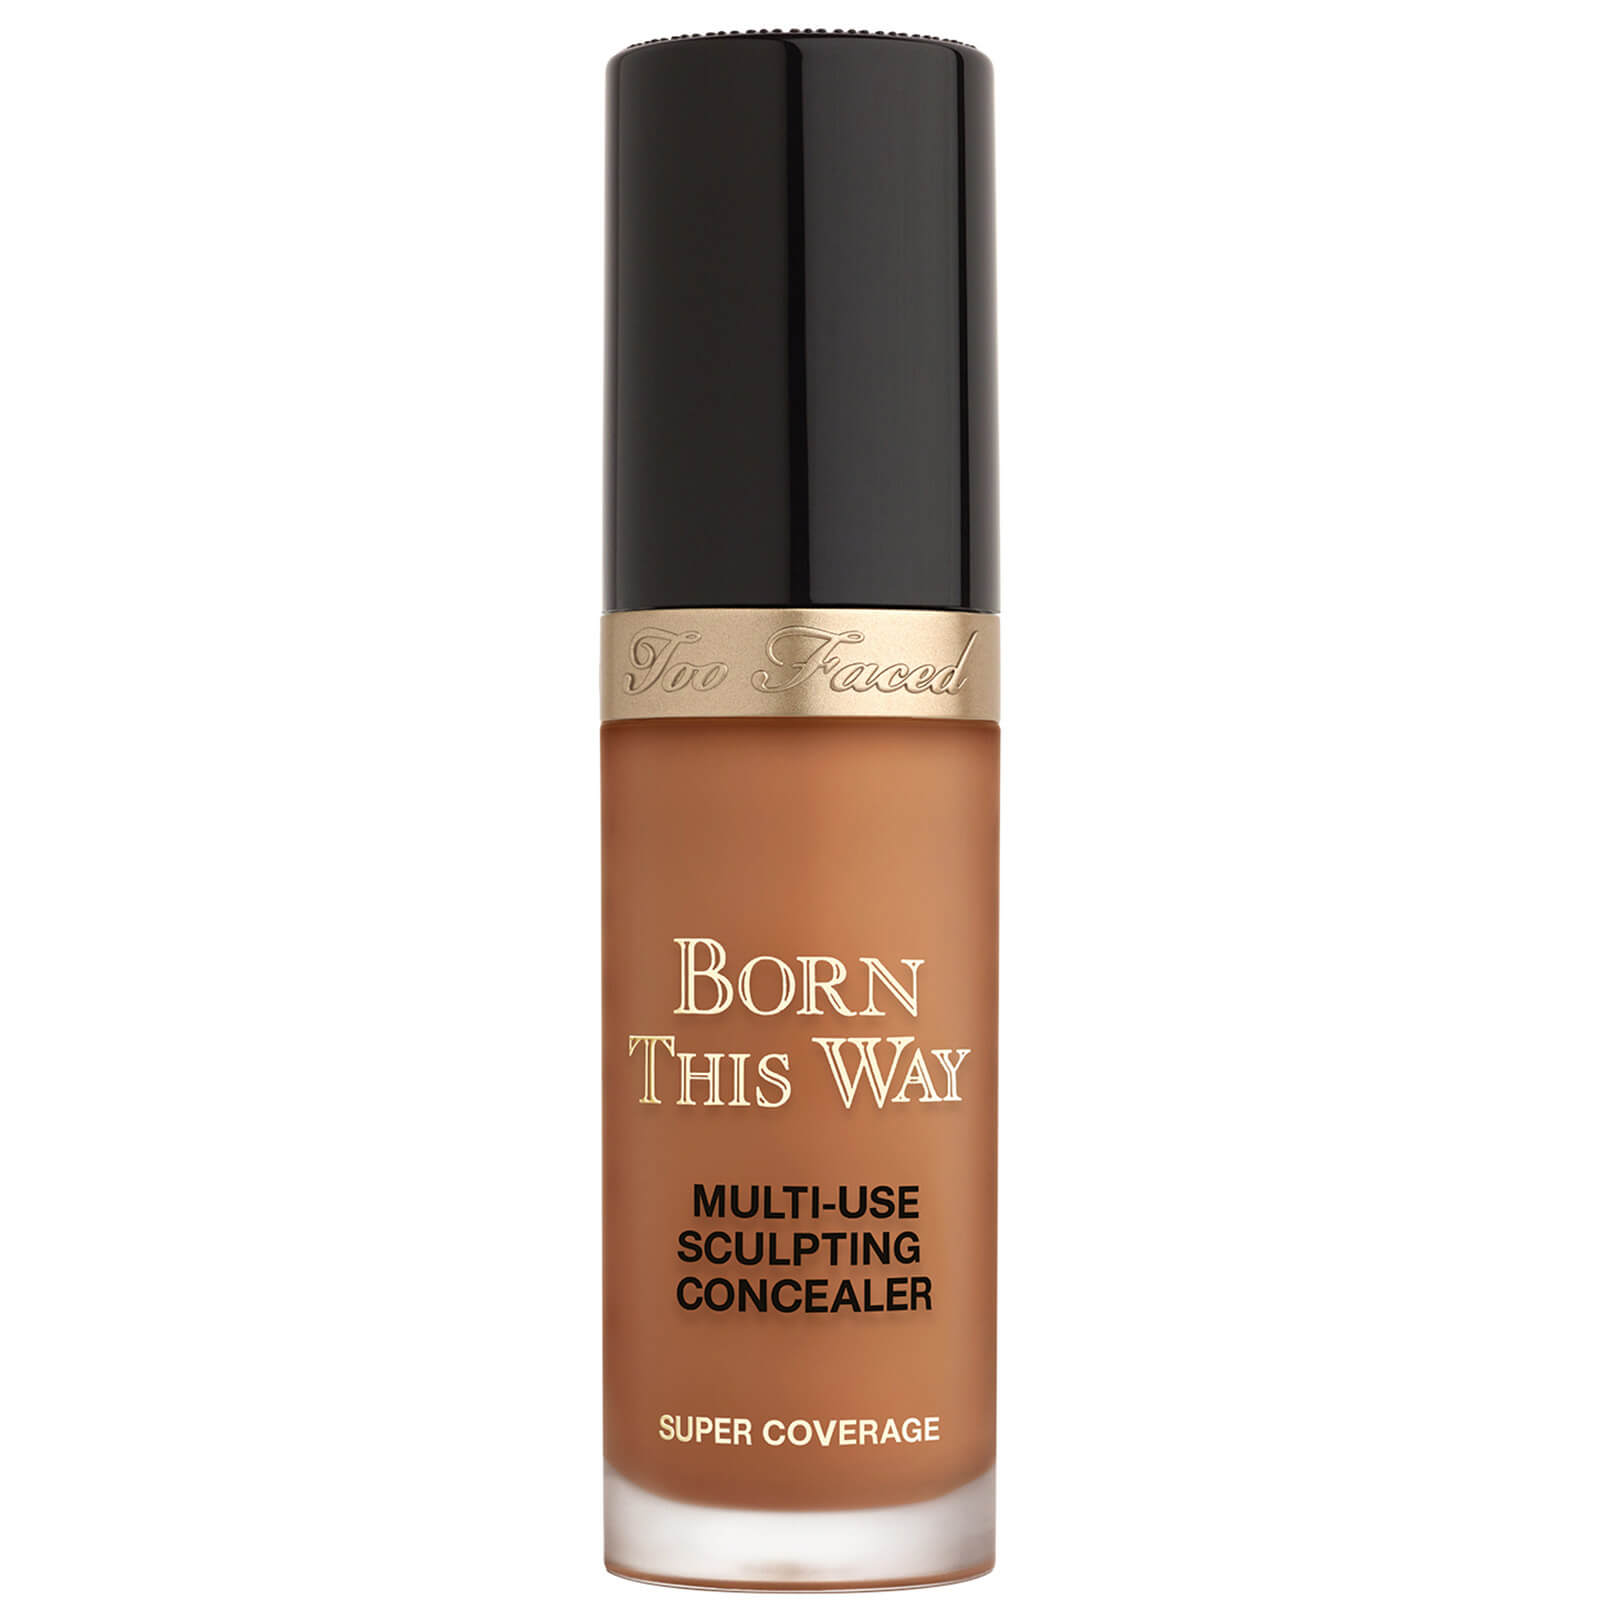 Too Faced Born This Way Super Coverage Multi-Use Concealer 13.5ml (Various Shades) - Mahogany